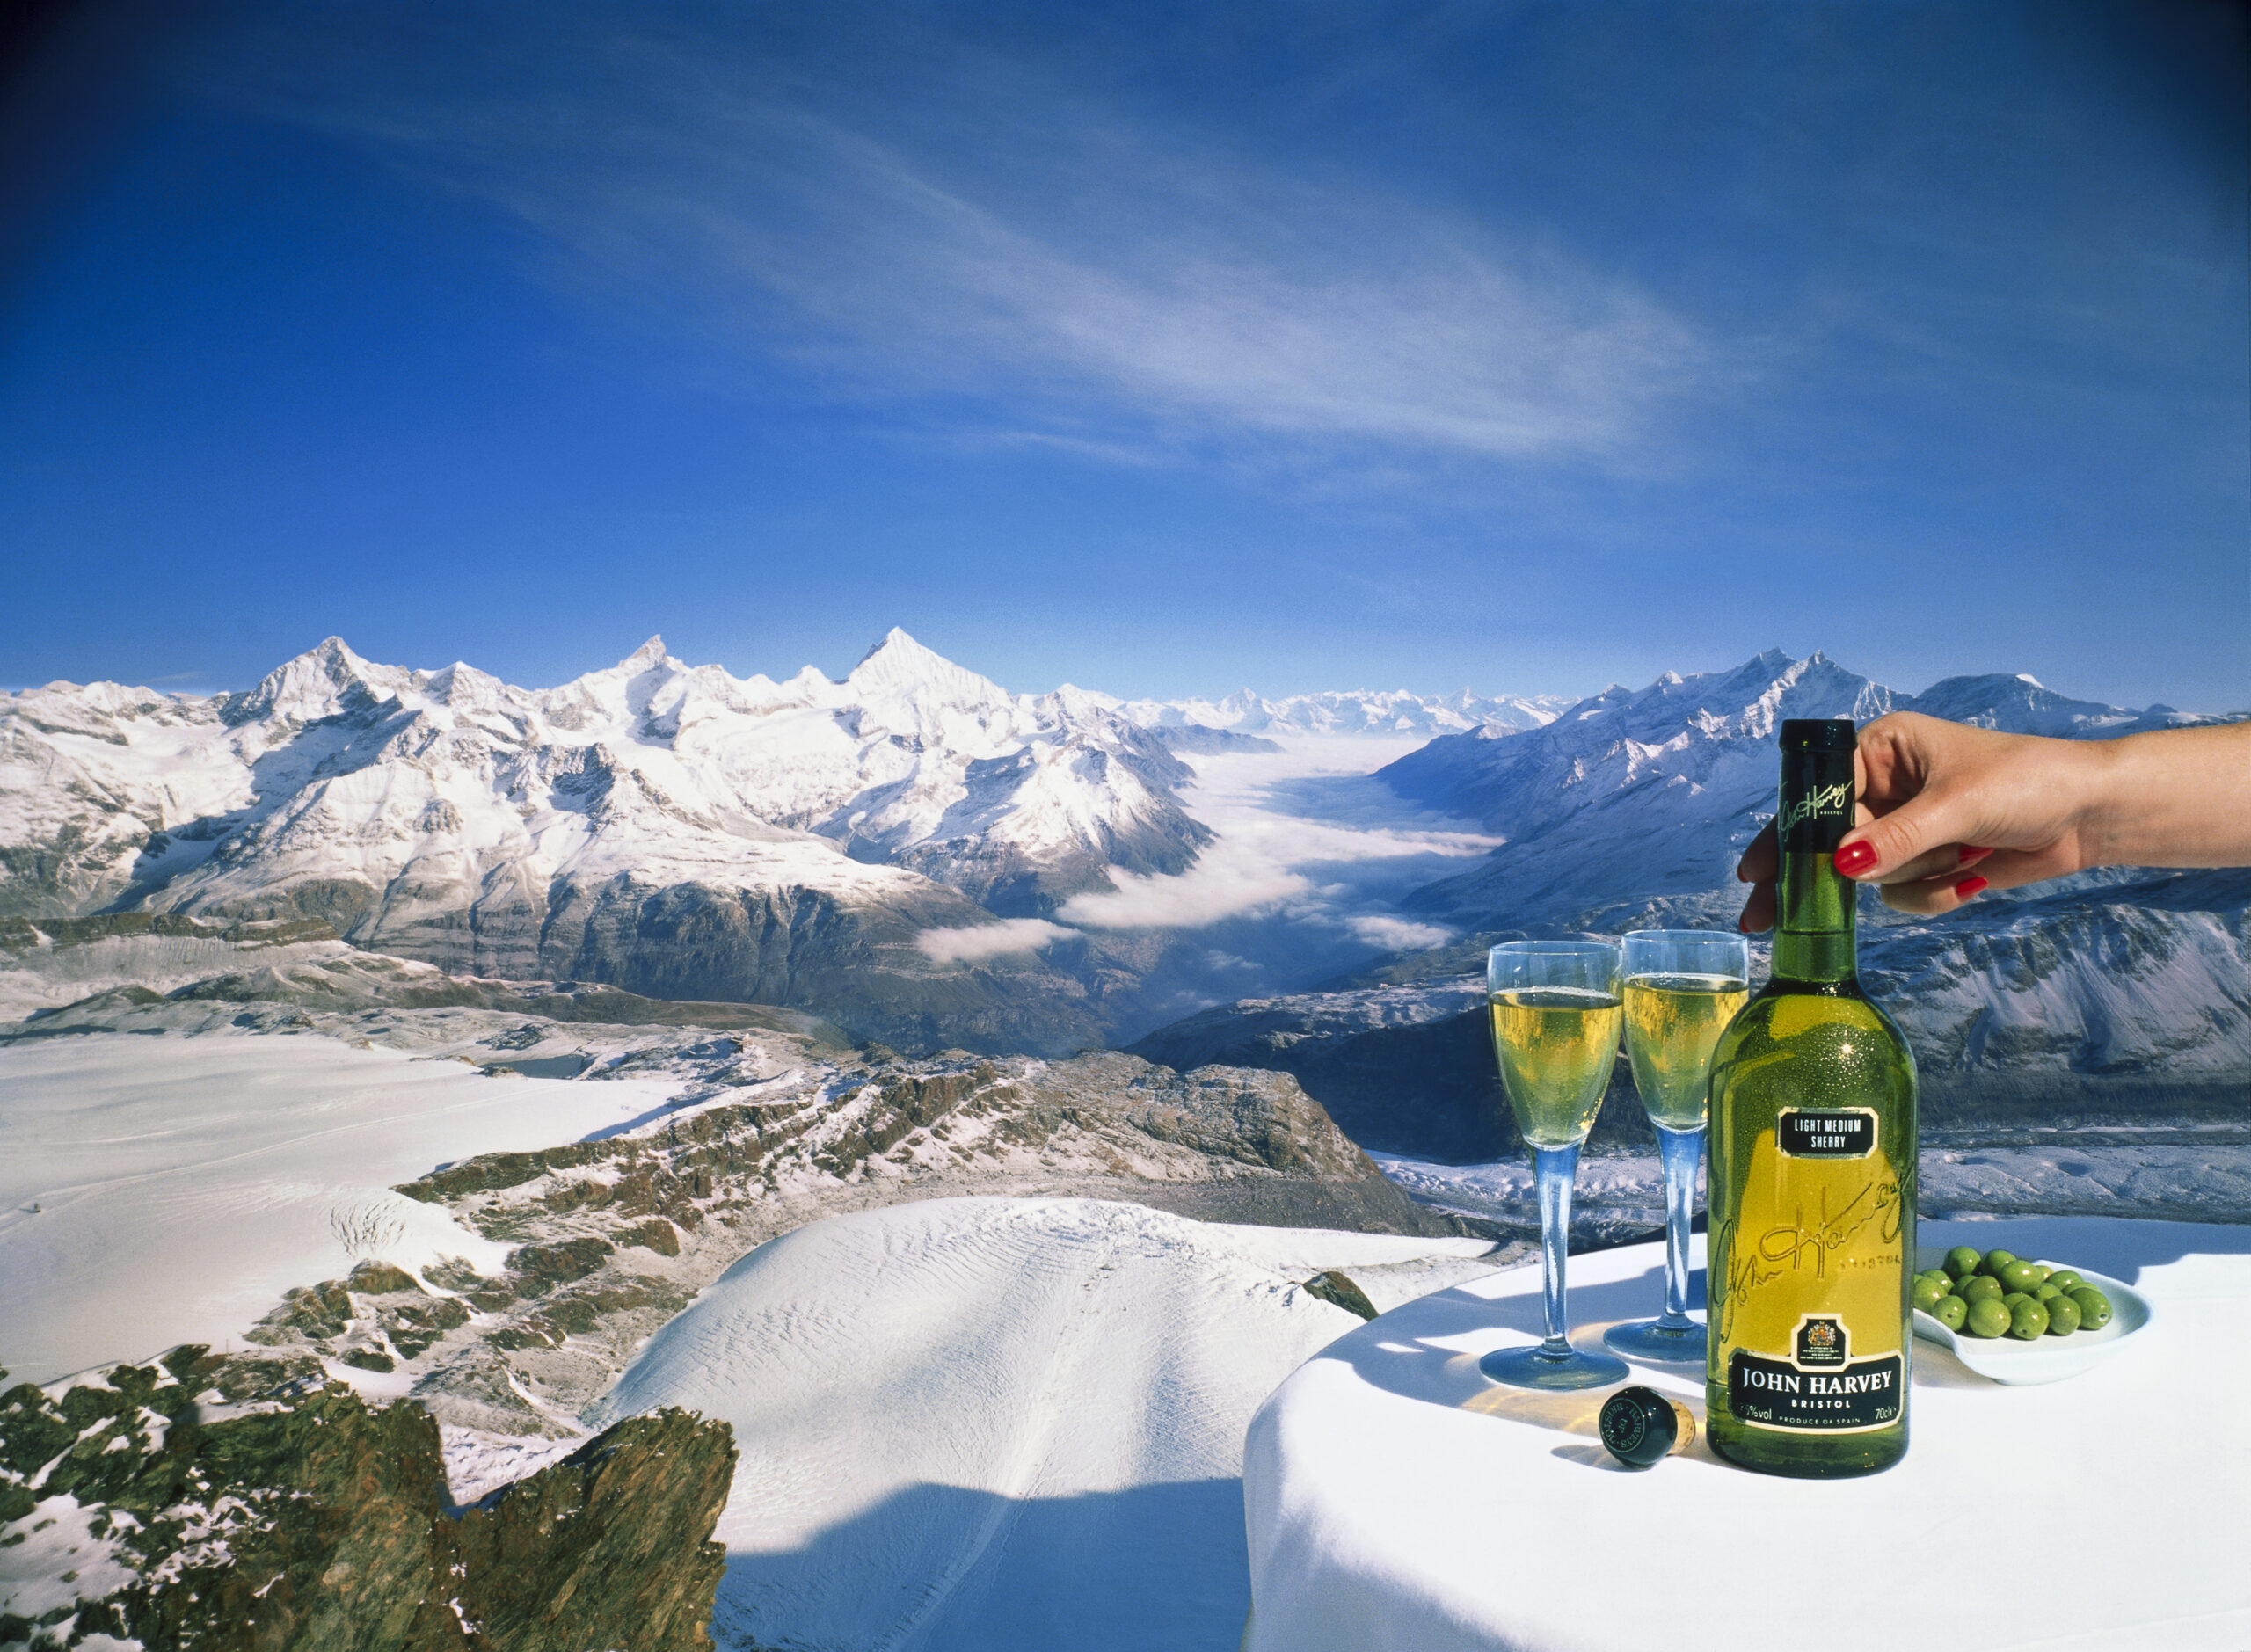 View from Mountain to looking down to valley with clouds and snow capped mountains around, Lady holding Sherry Bottle with glasses and olives on white tablecloth on table